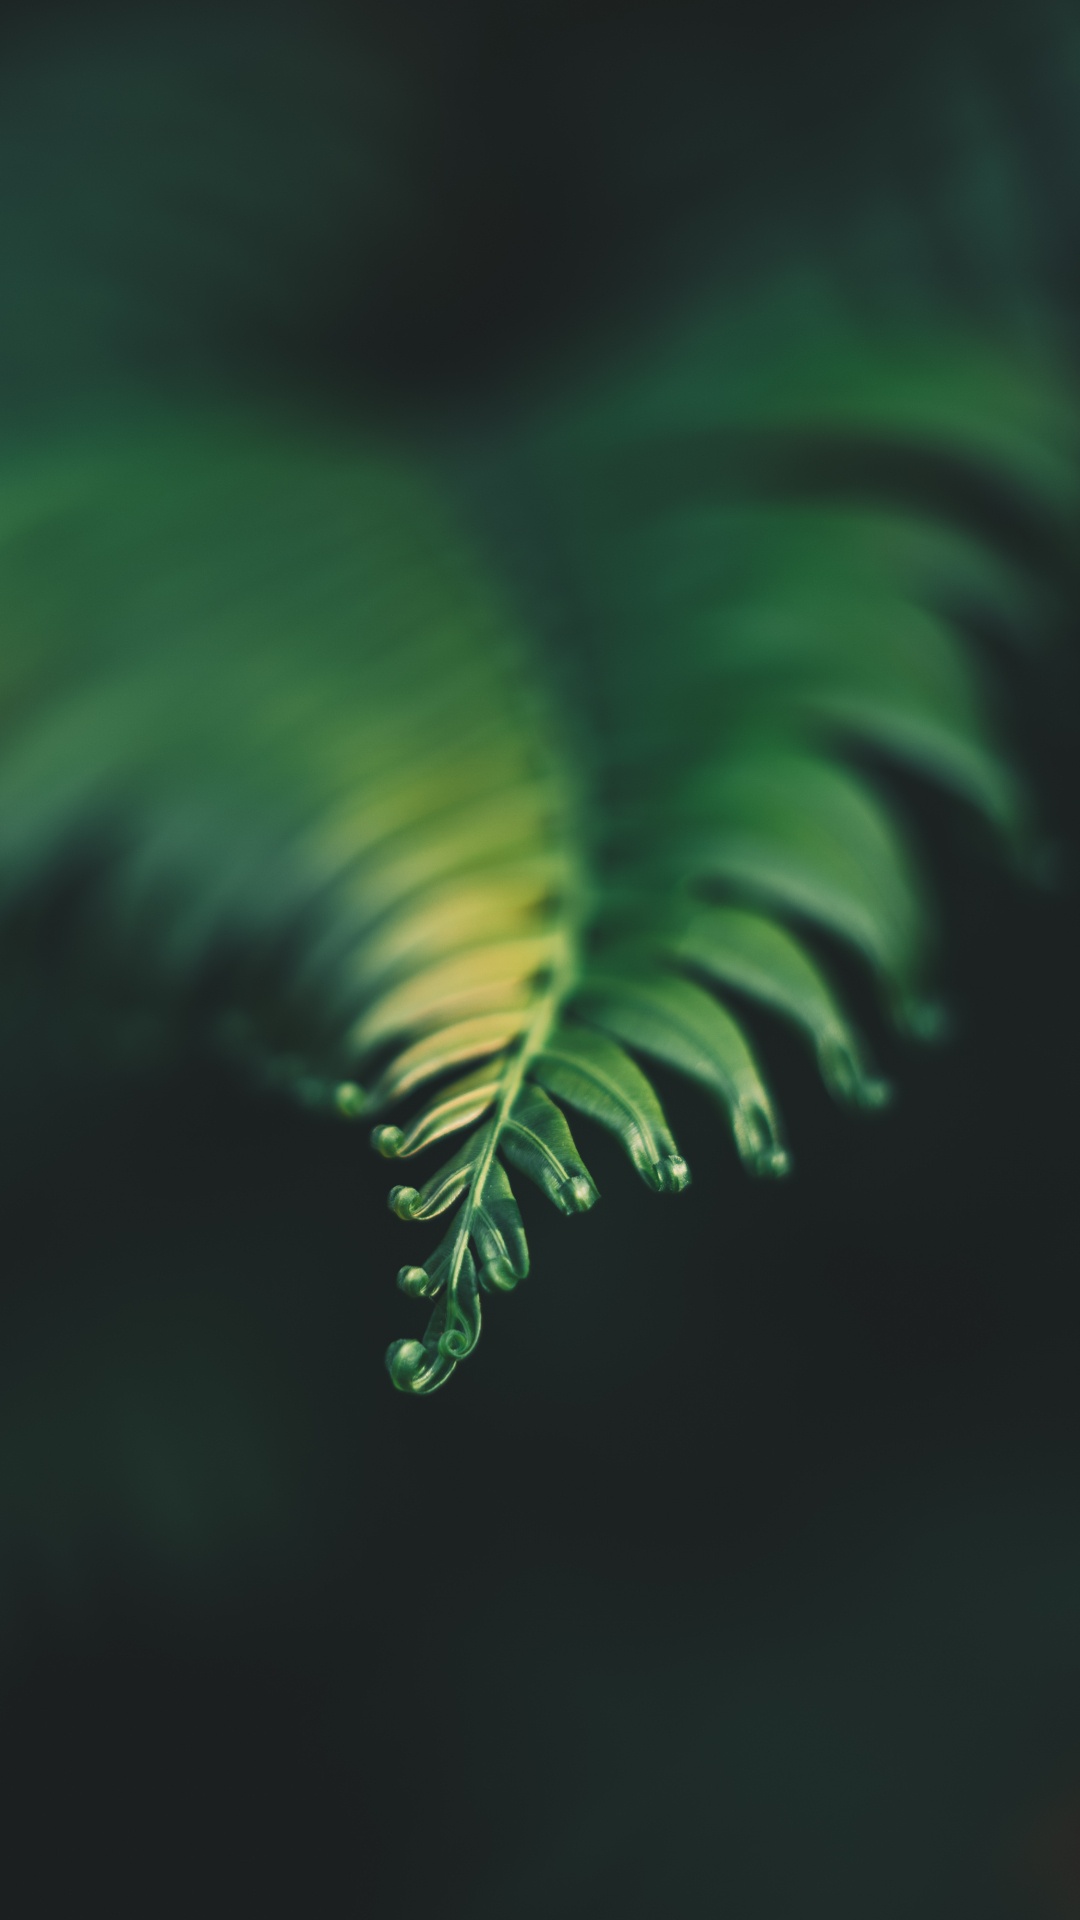 Plante, Feuille, Fougère, Green, Nature. Wallpaper in 1080x1920 Resolution